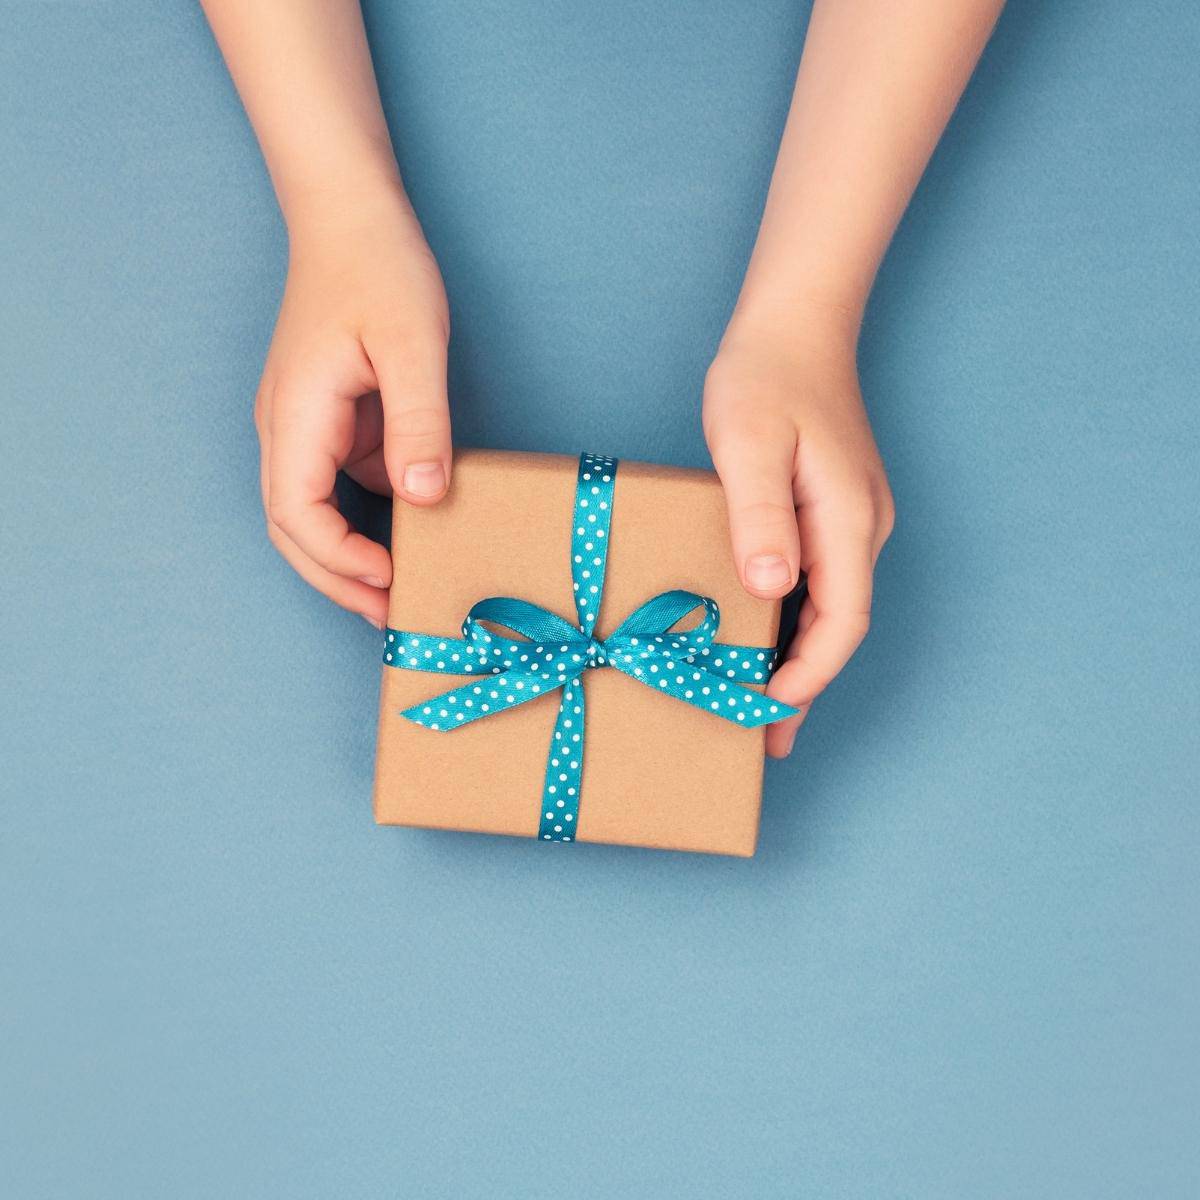 The best Prezzybox gifts on the go